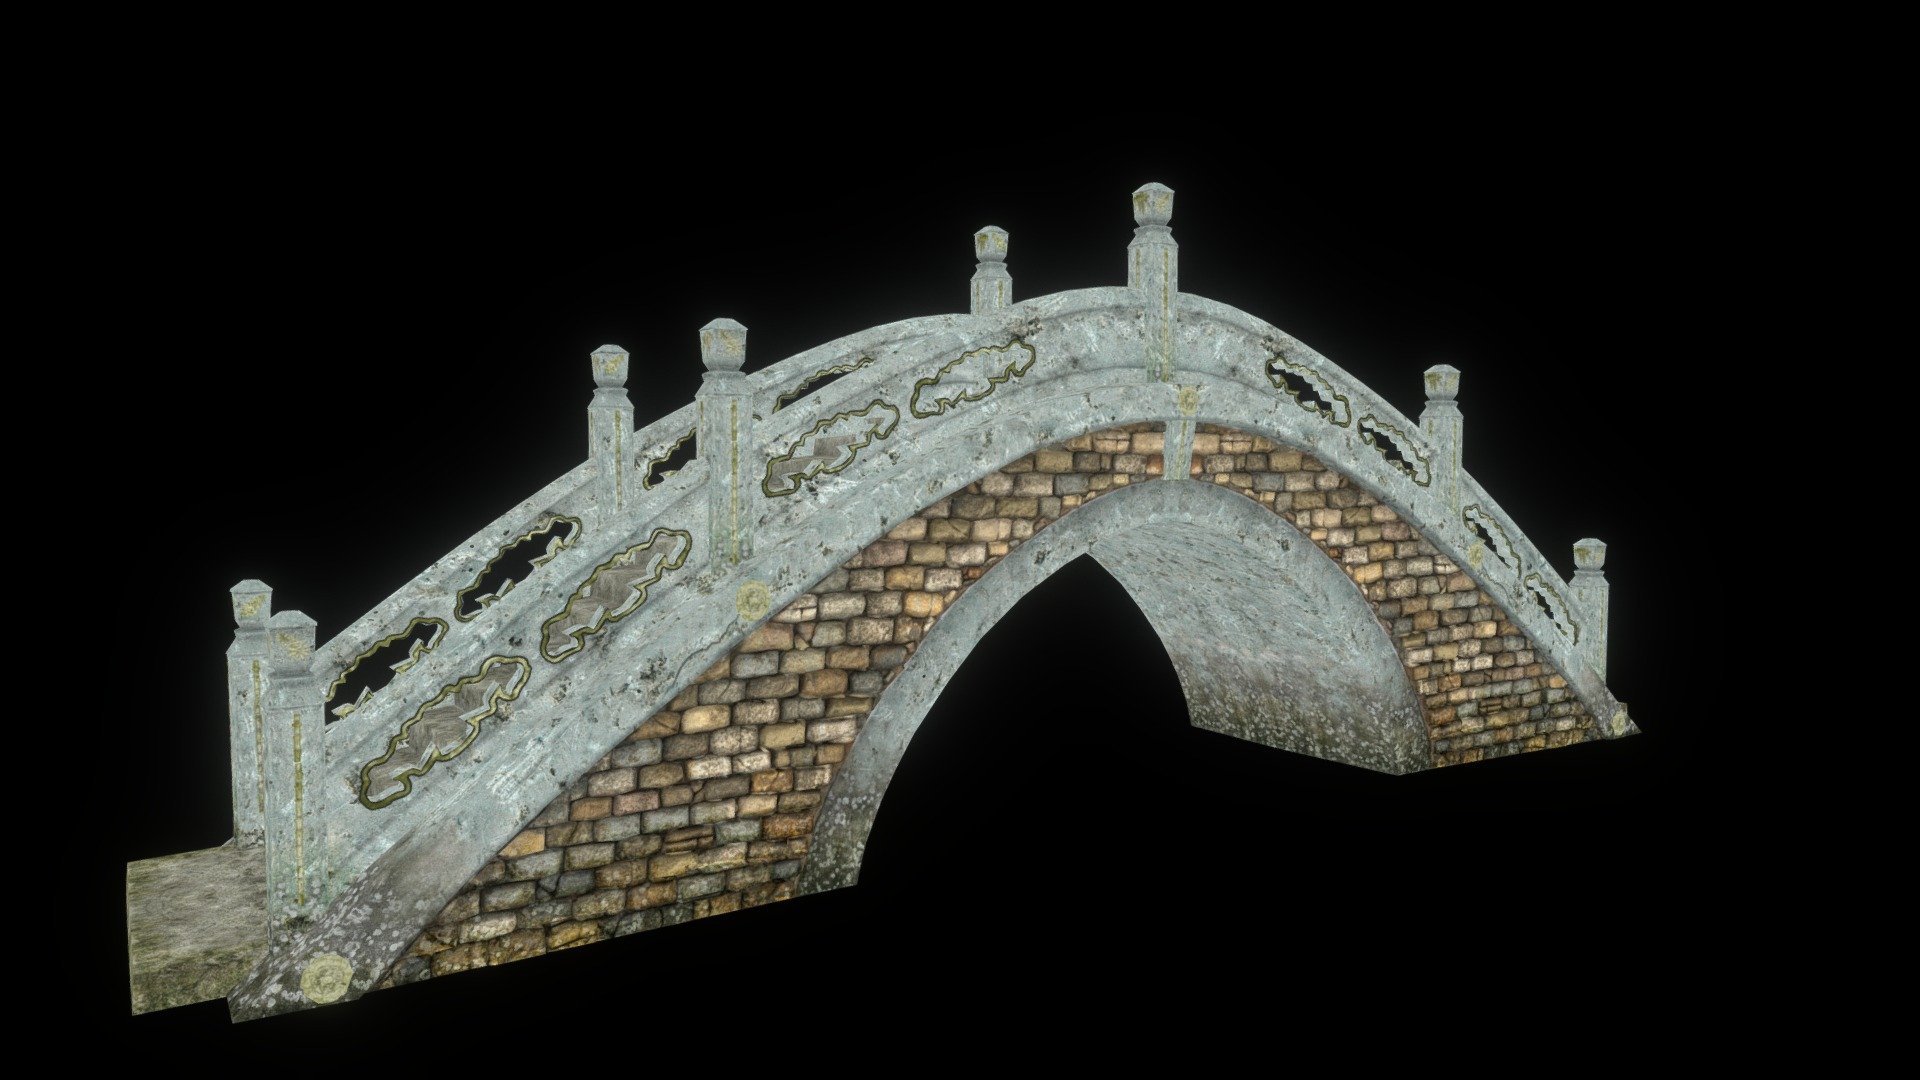 A Japanese / Chinese style bridge prop that was created for my Japanese Garden scene in Cry Engine 3 3d model